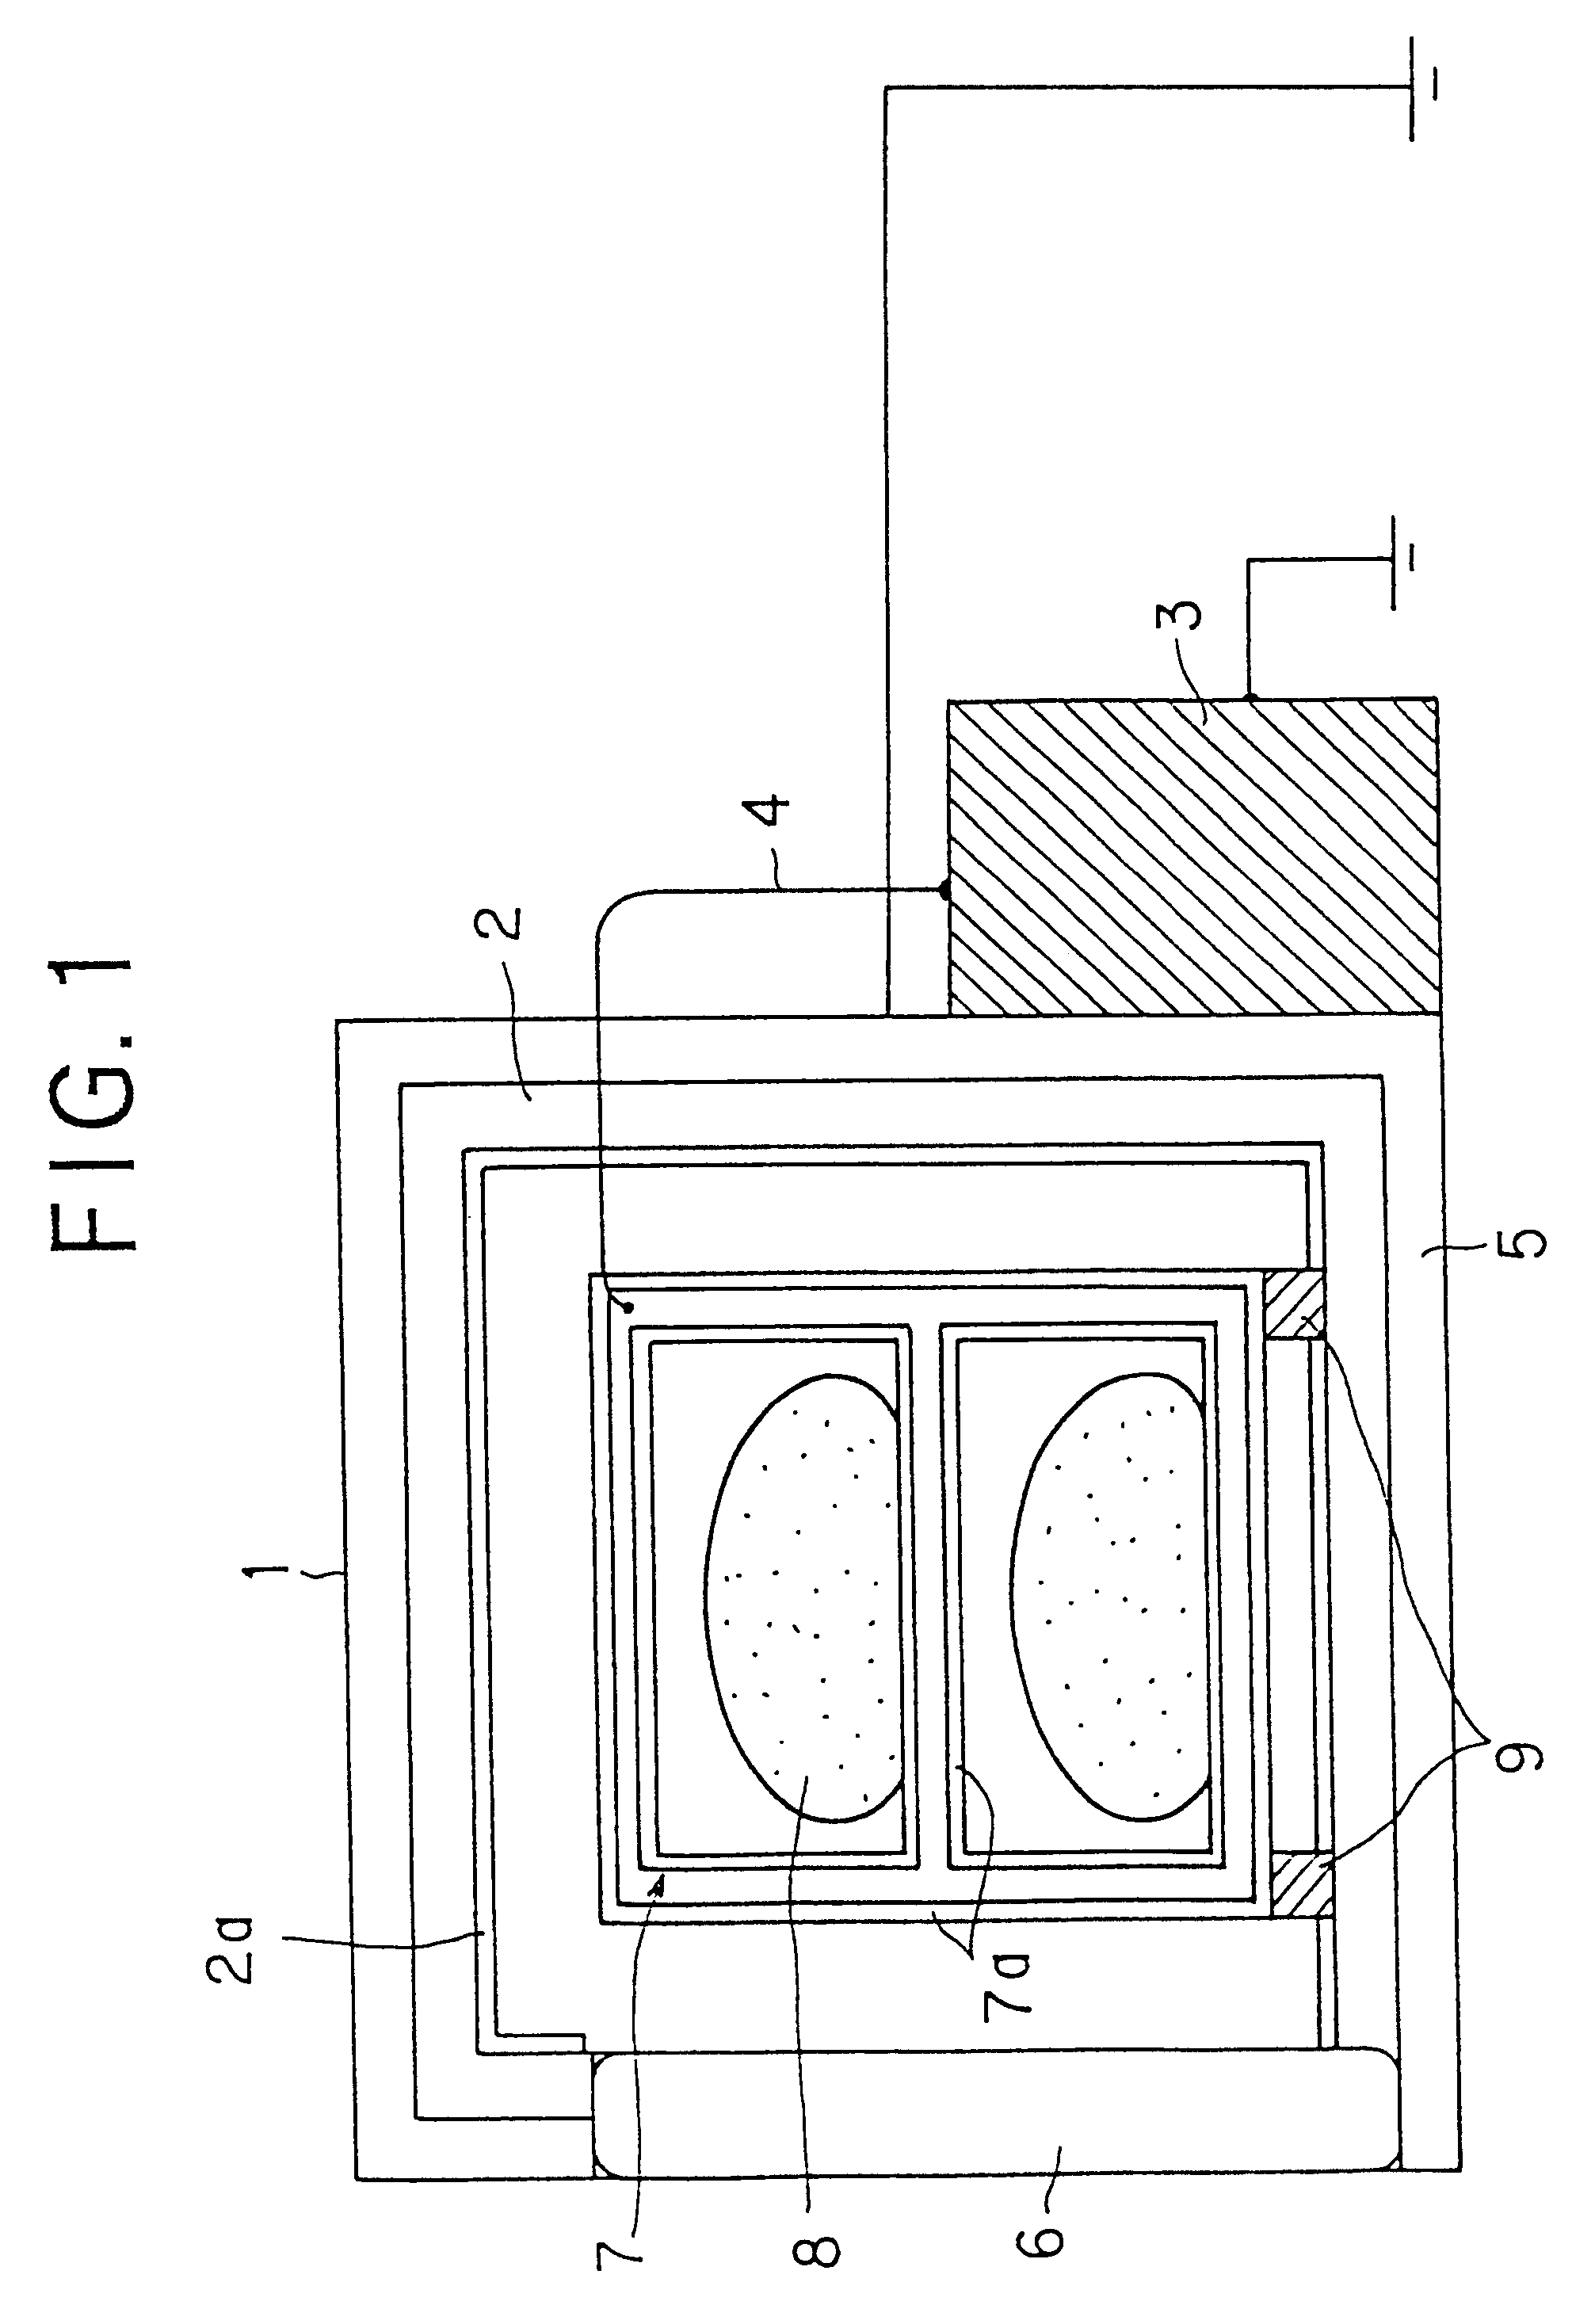 Method of treating a food object in an electrostatic field